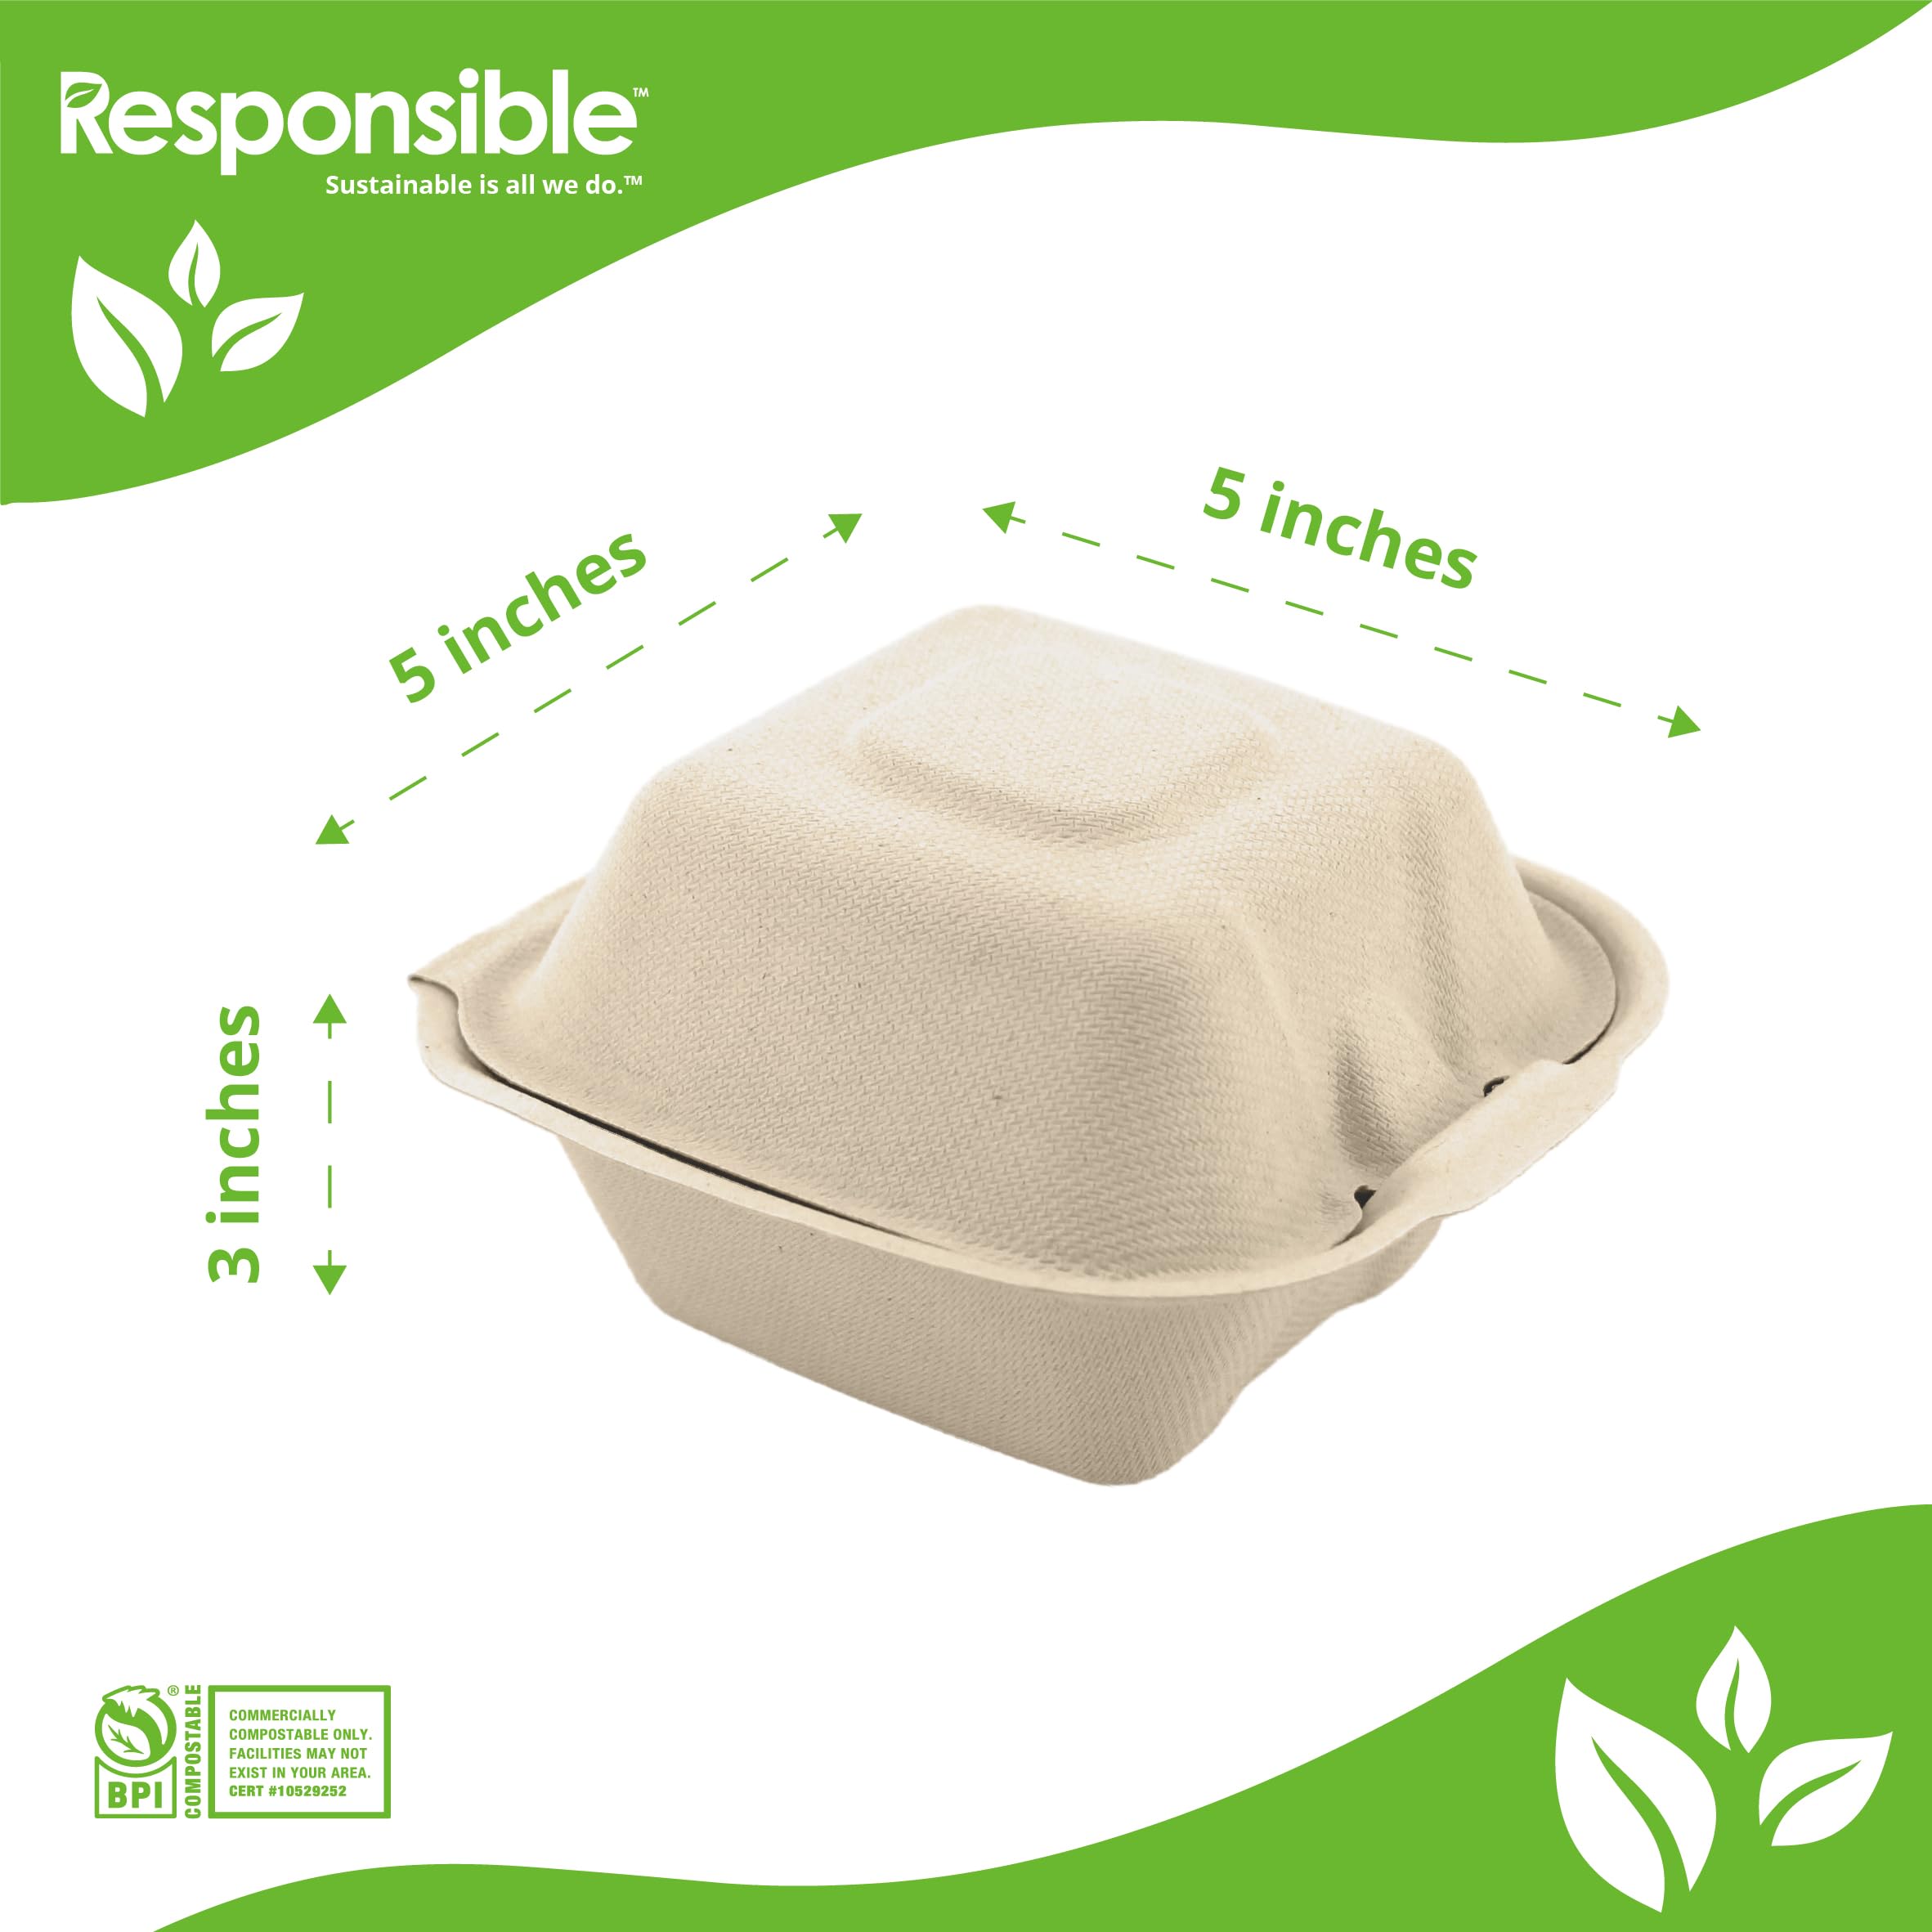 Compostable 5 x 5 inch Molded Fiber Hinged Containers Brown